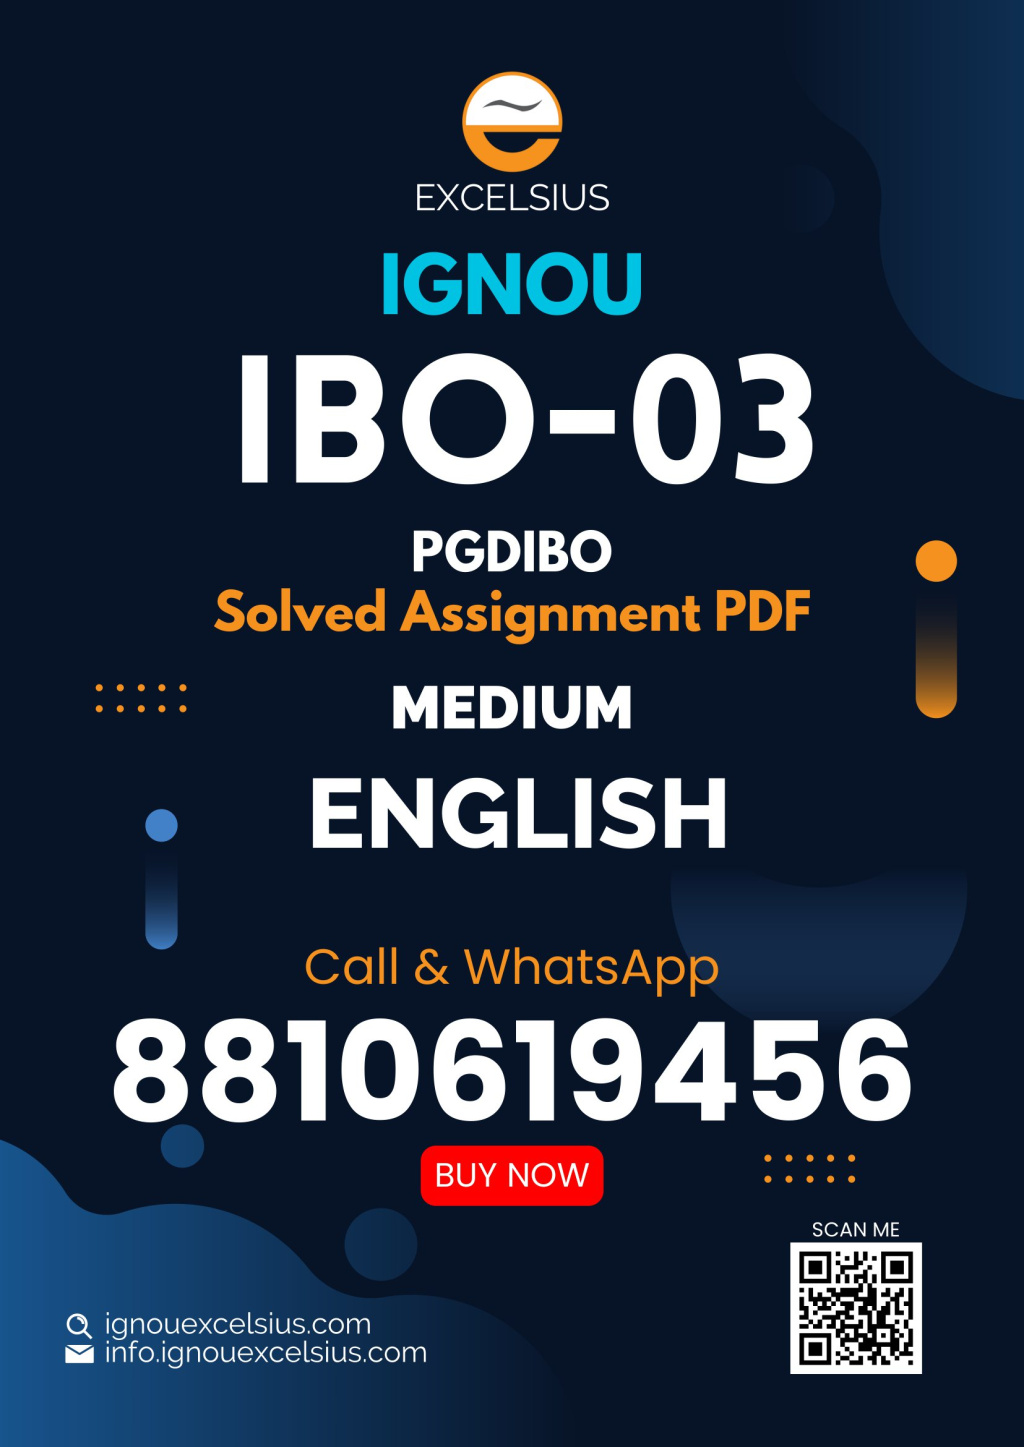 IGNOU IBO-03 (PGDIBO) - India's Foreign Trade Latest Solved Assignment-January 2023 - July 2023